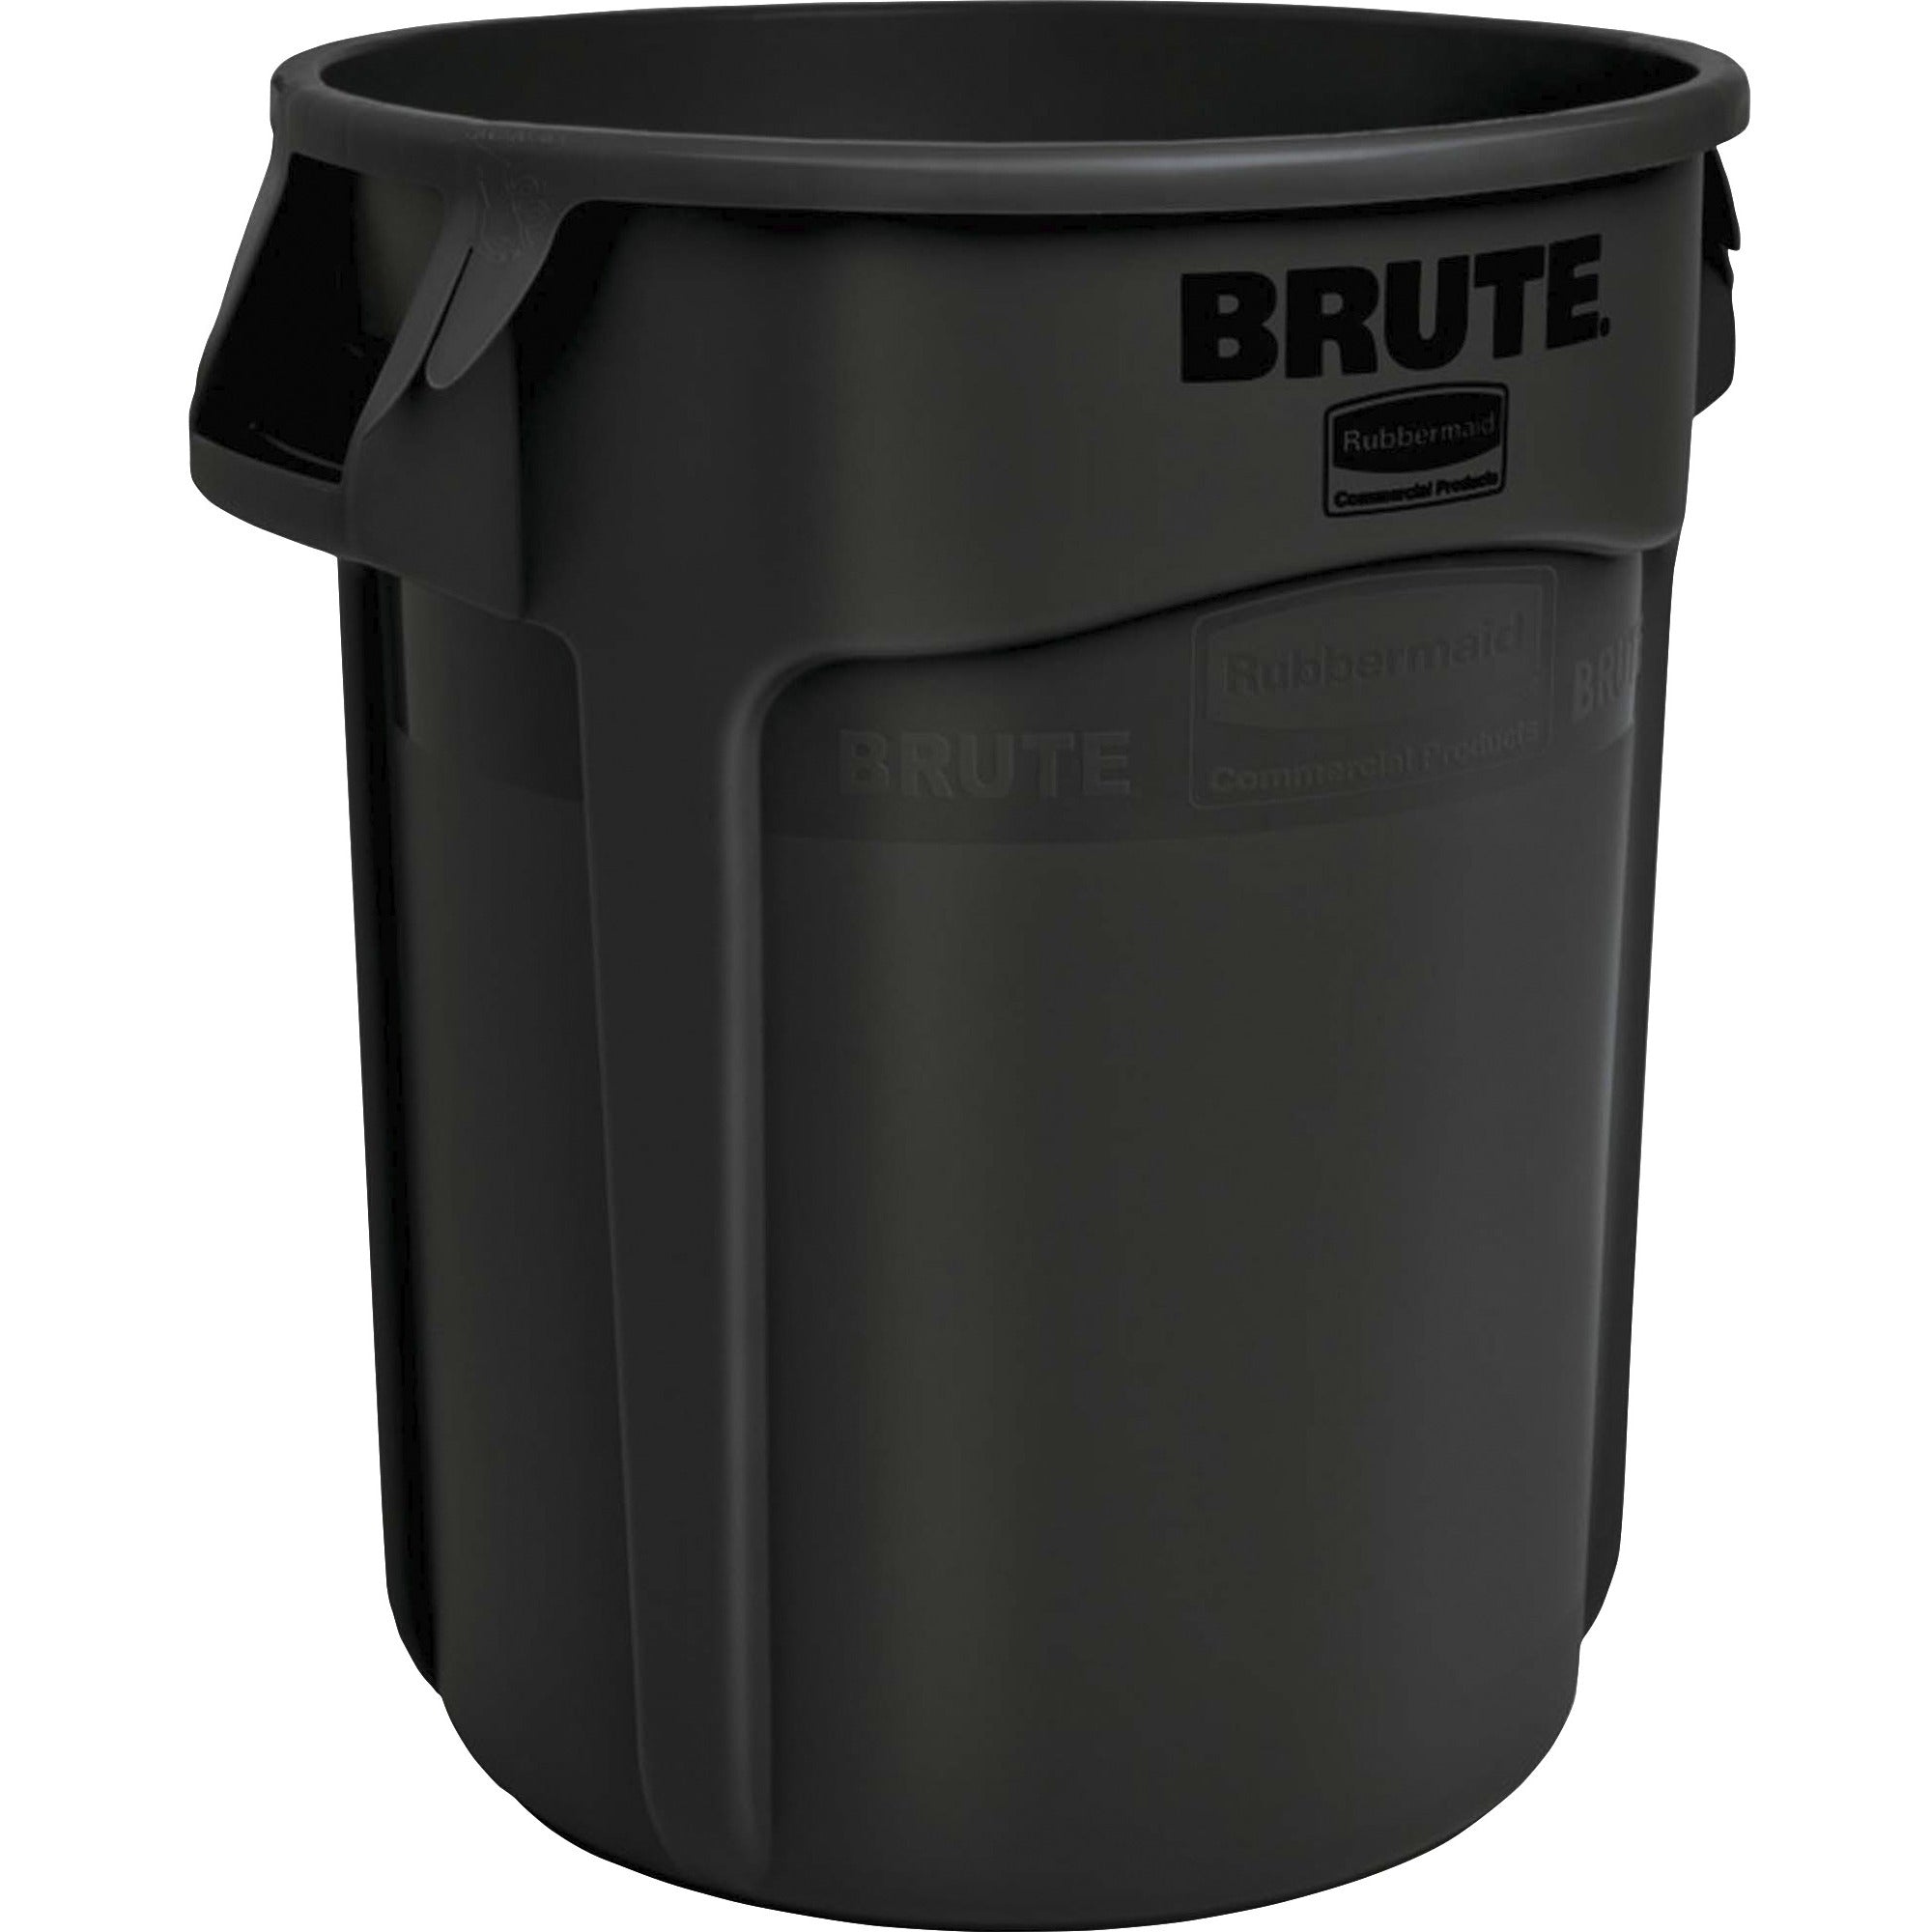 rubbermaid-commercial-brute-55-gallon-container_rcp1779739ct - 1